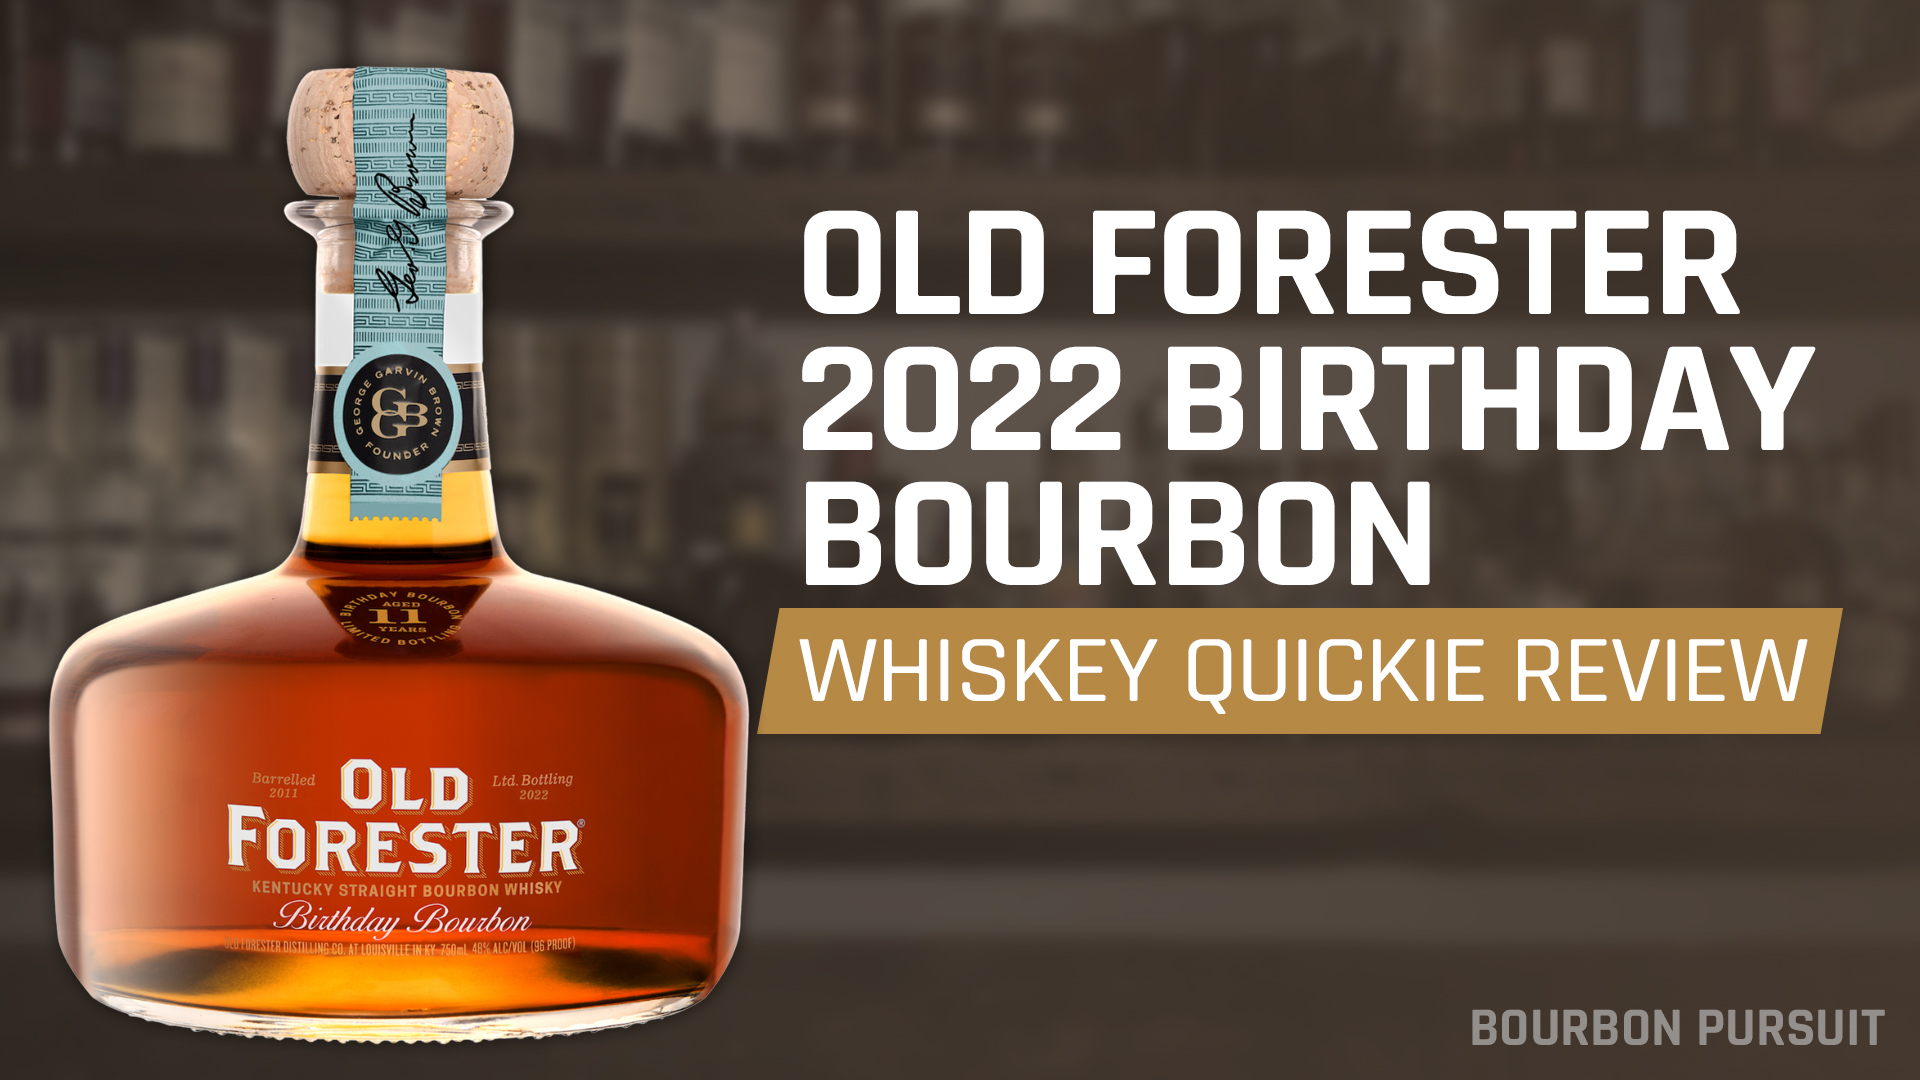 Whiskey Quickie Old Forester Birthday Bourbon 2022 Review BOURBON